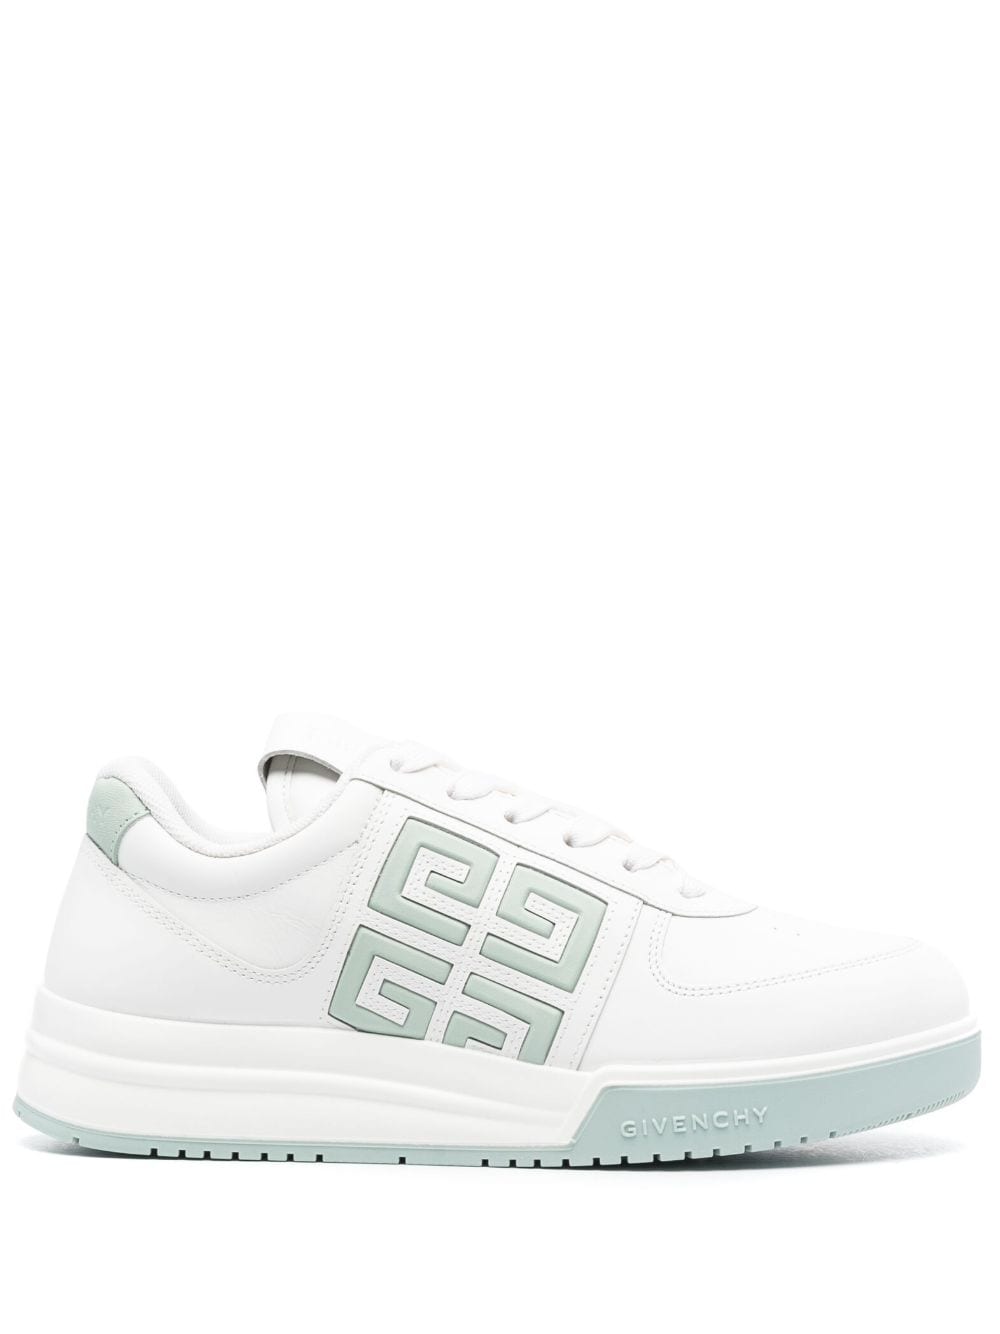 Givenchy G4 low-top sneakers - White von Givenchy